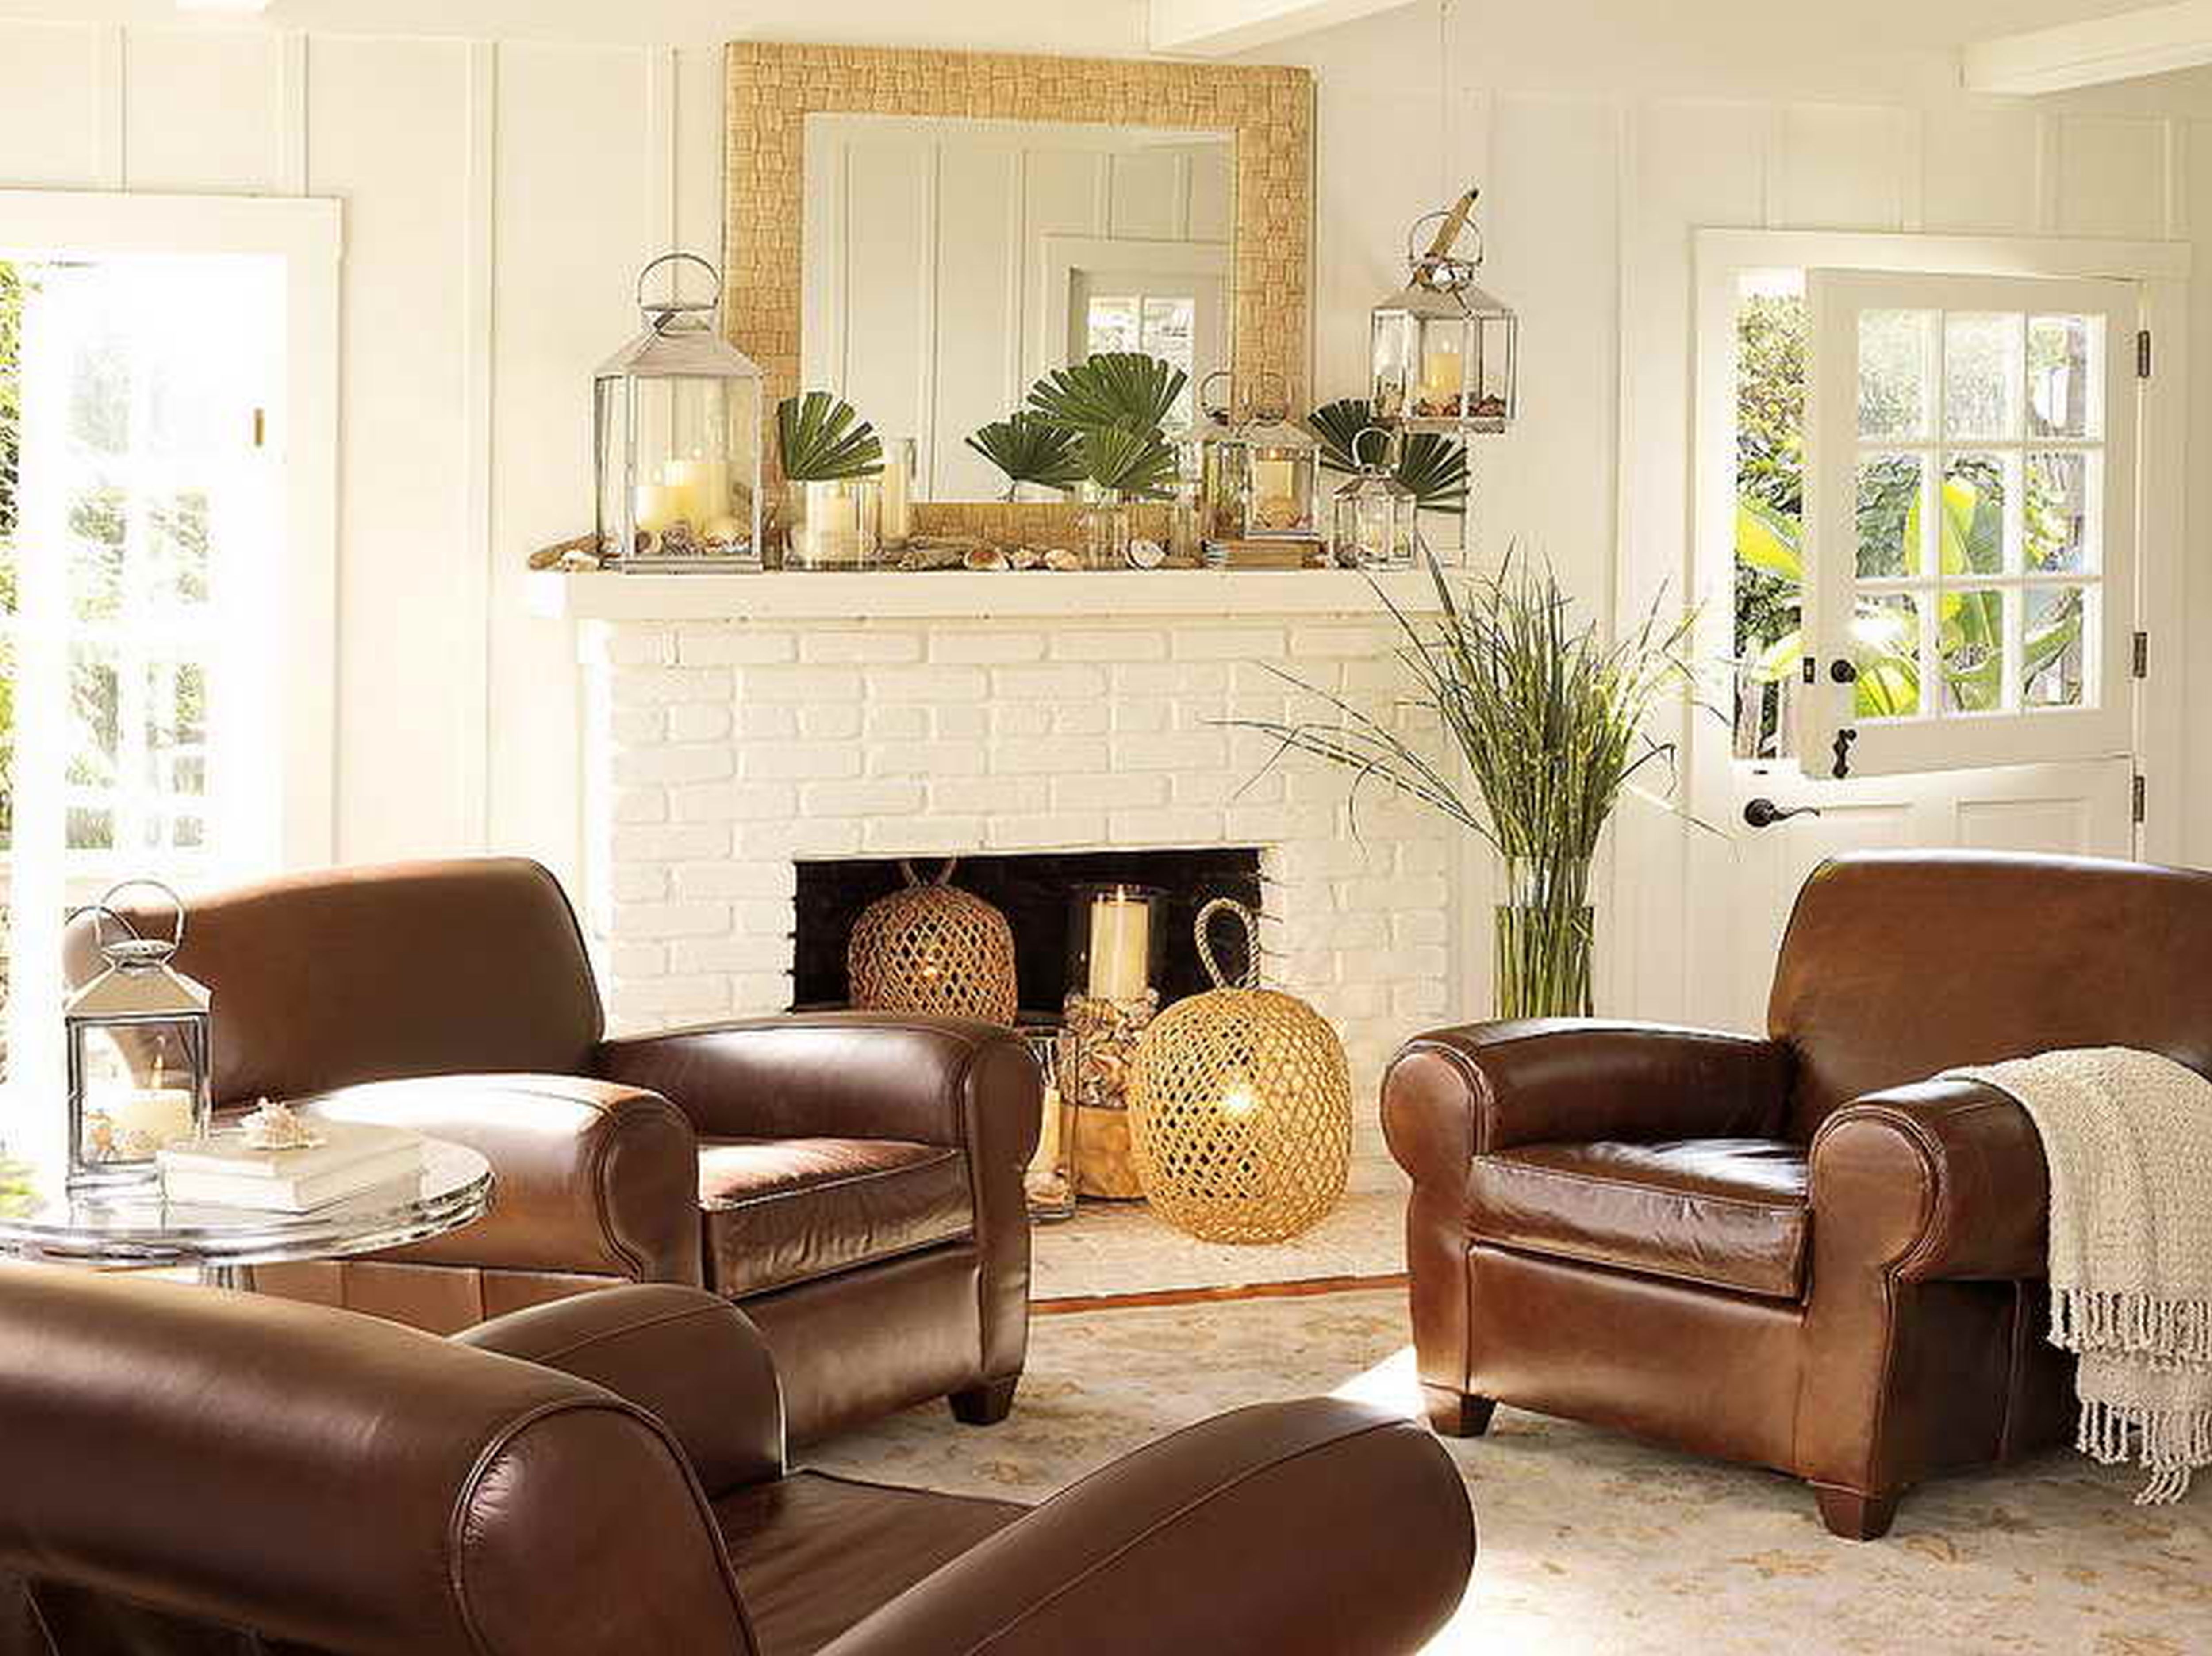 inexpensive home decorating ideas living room